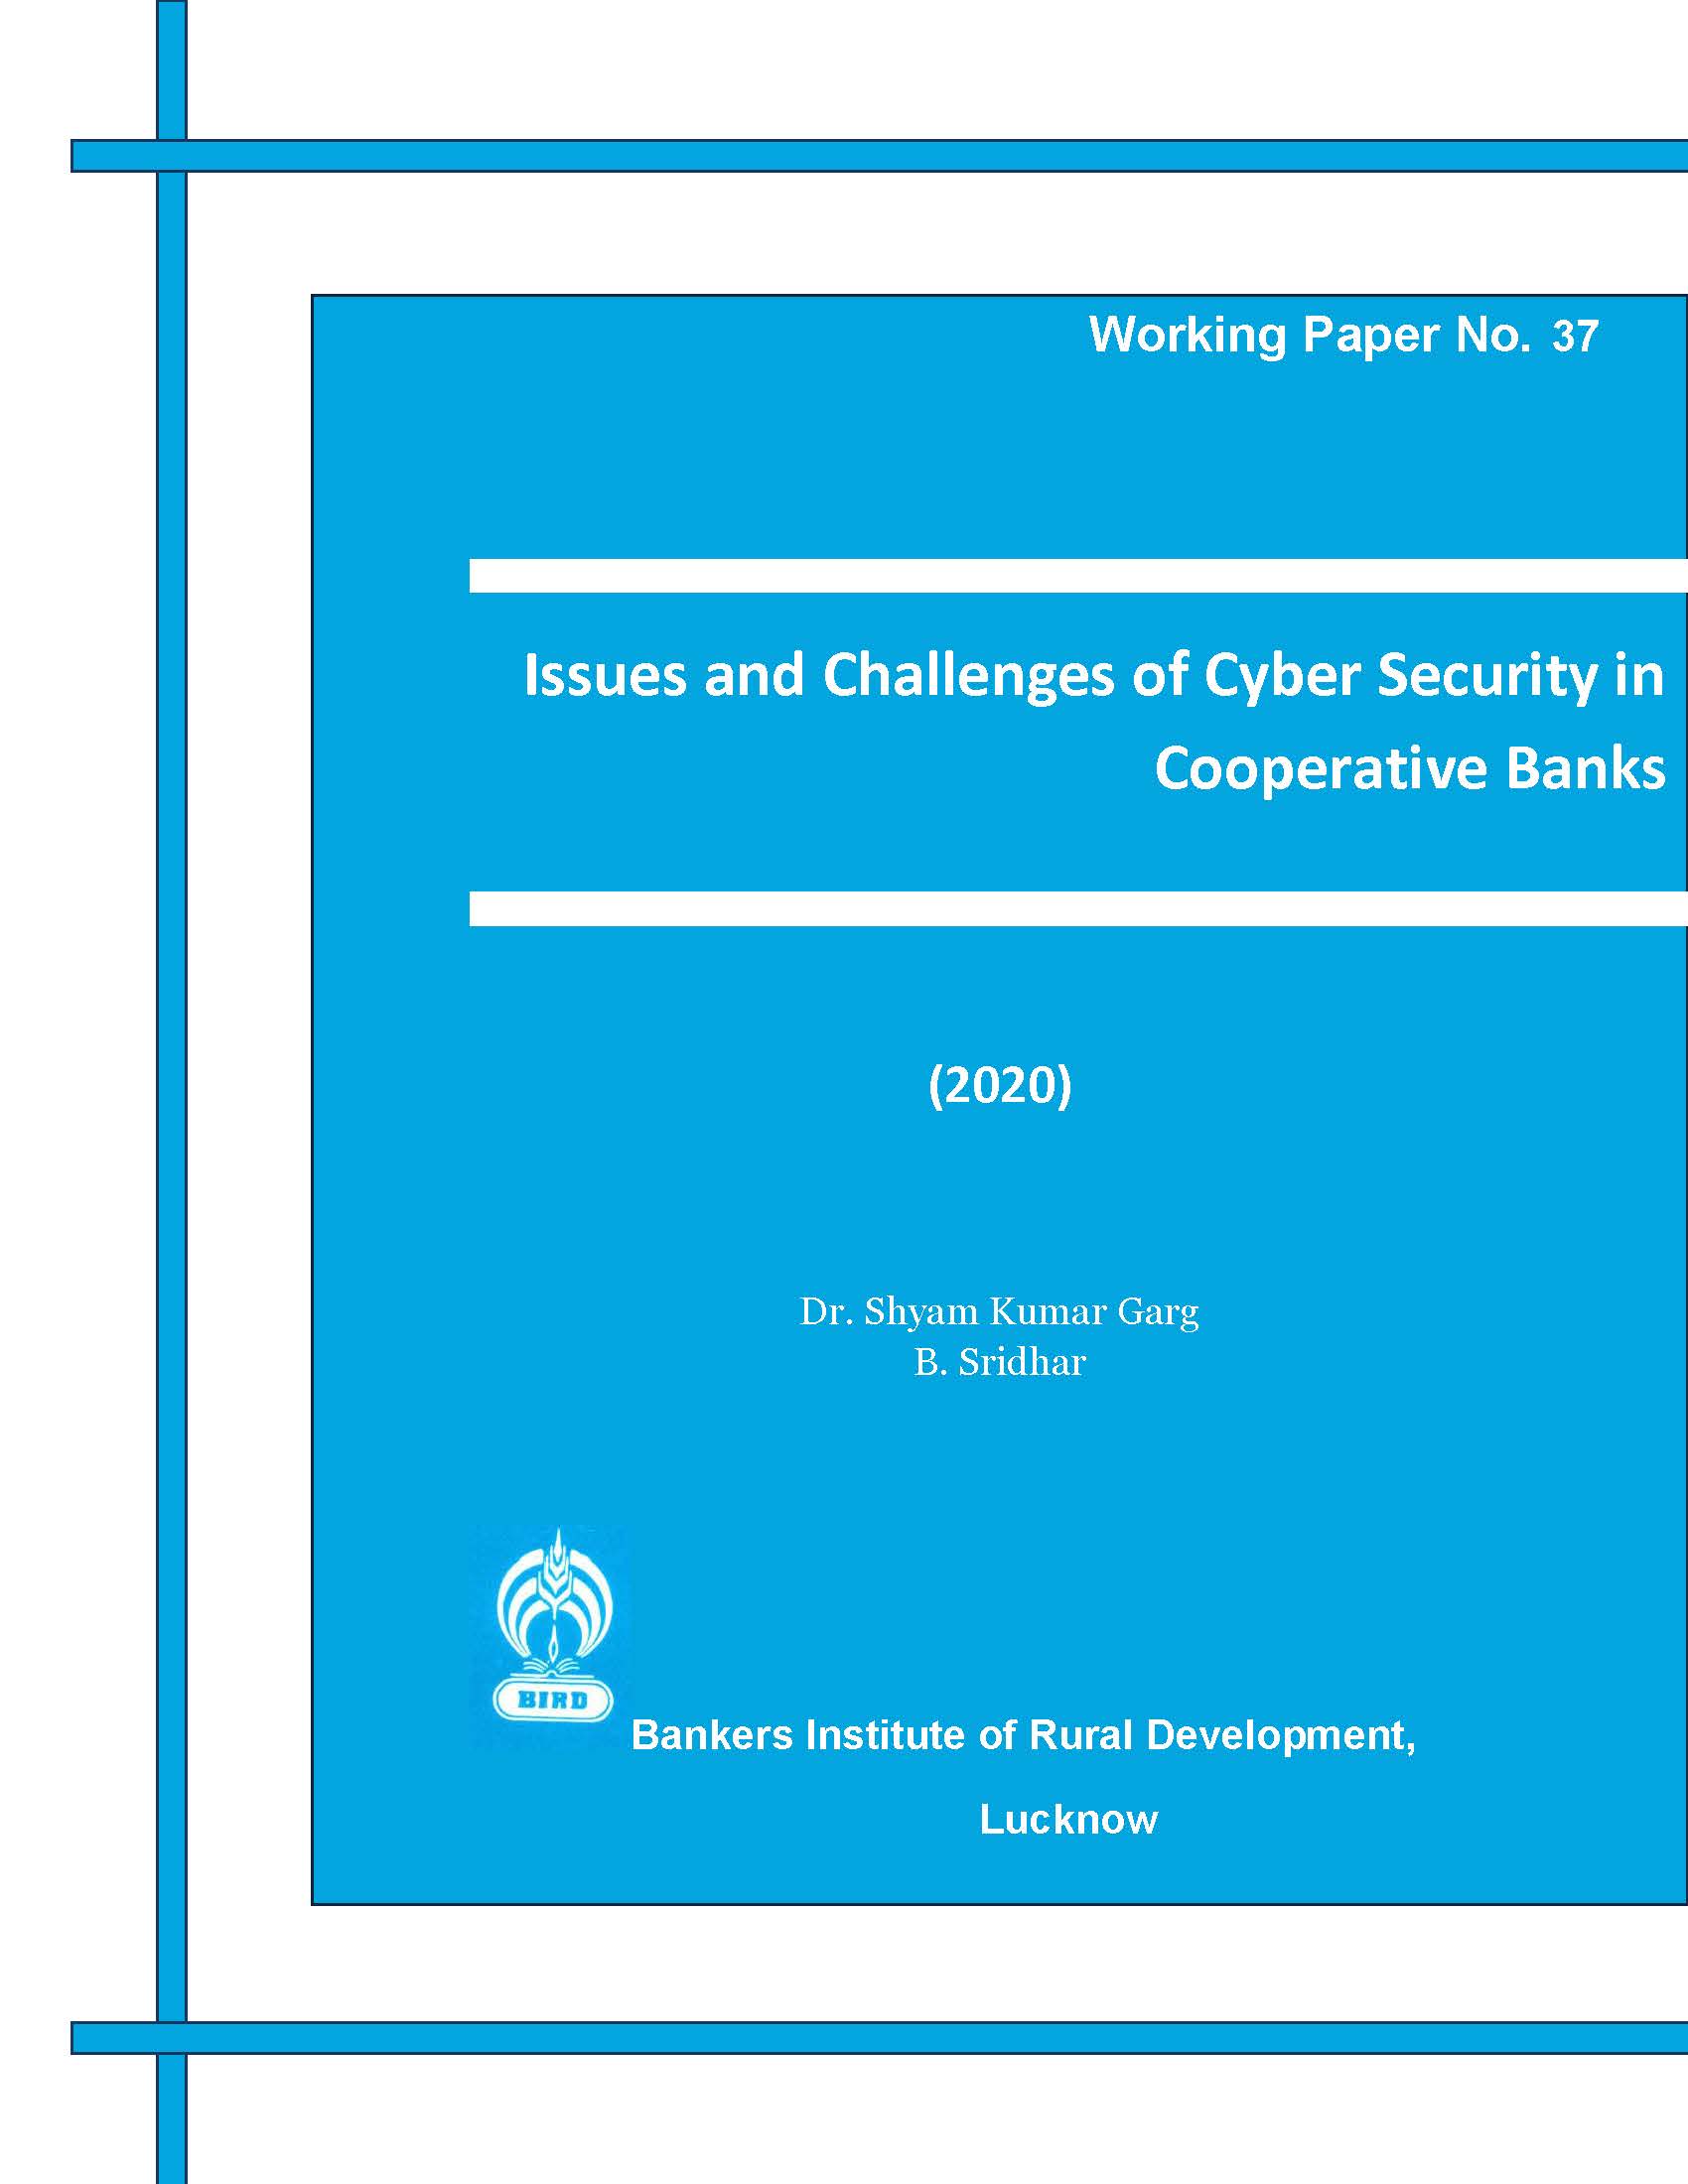 Issues and Challenges of Cyber Security in Cooperative Banks